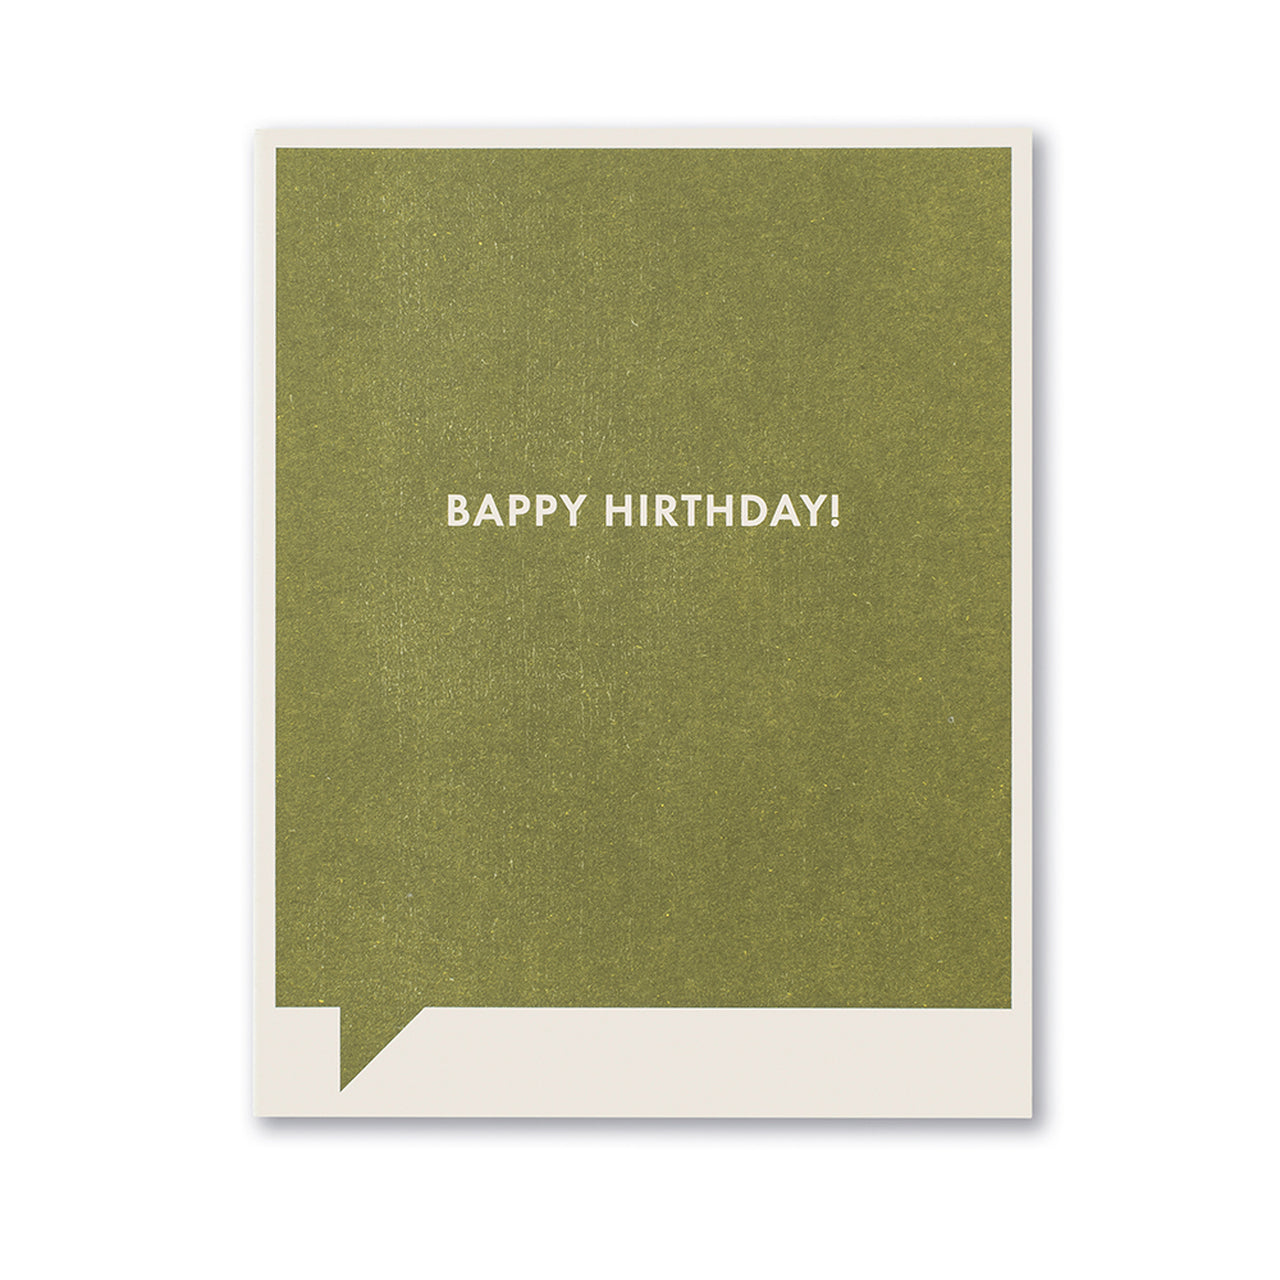 Frank and Funny Greeting Card - Birthday - Bappy Hirthday! - Mellow Monkey